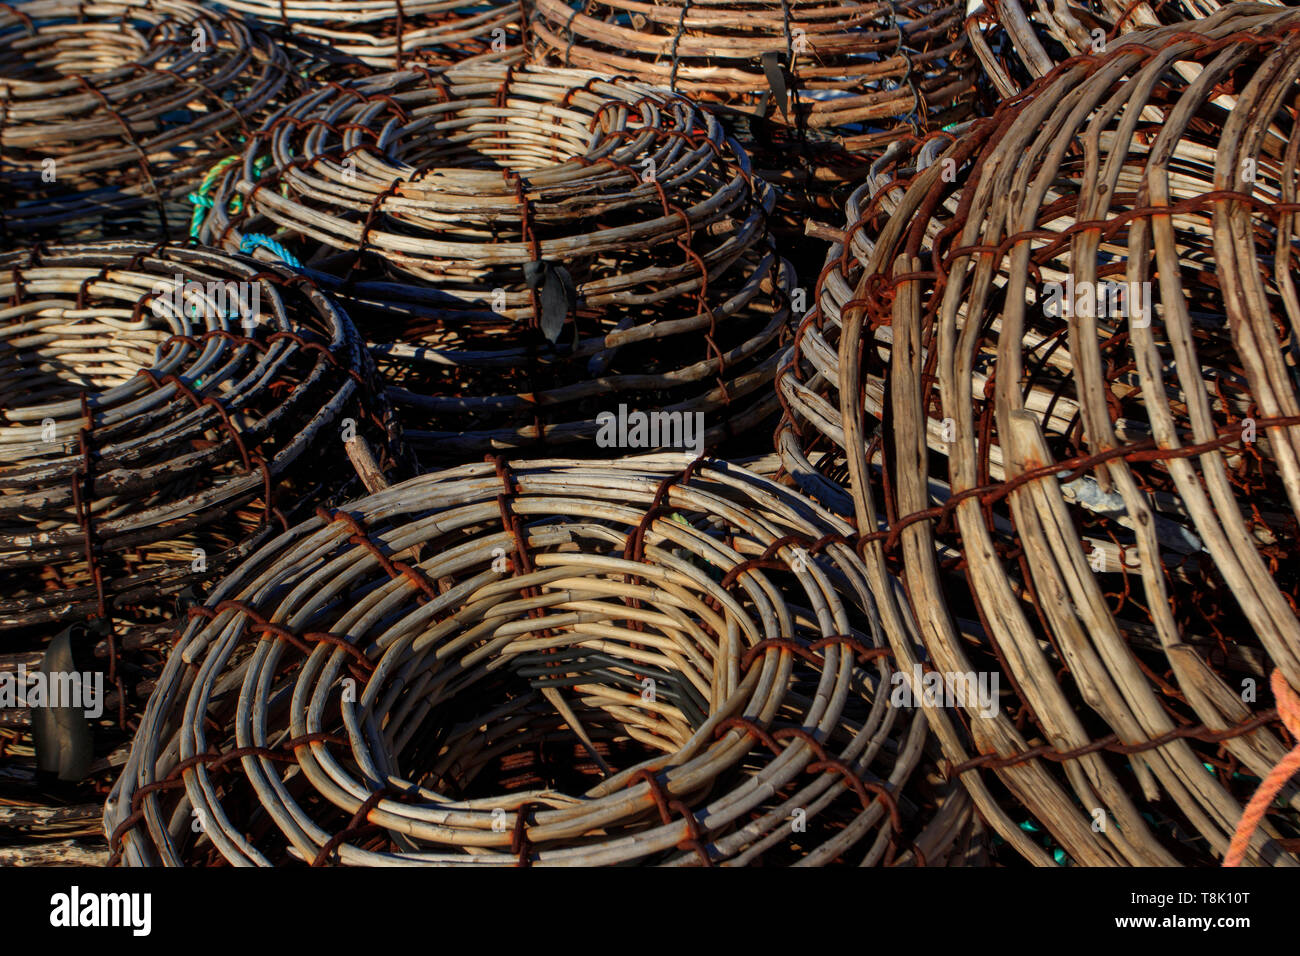 Traditional willow lobster crab fishing pots stacked on board a fishing boat on the east coast of Tasmania, Australia. Stock Photo